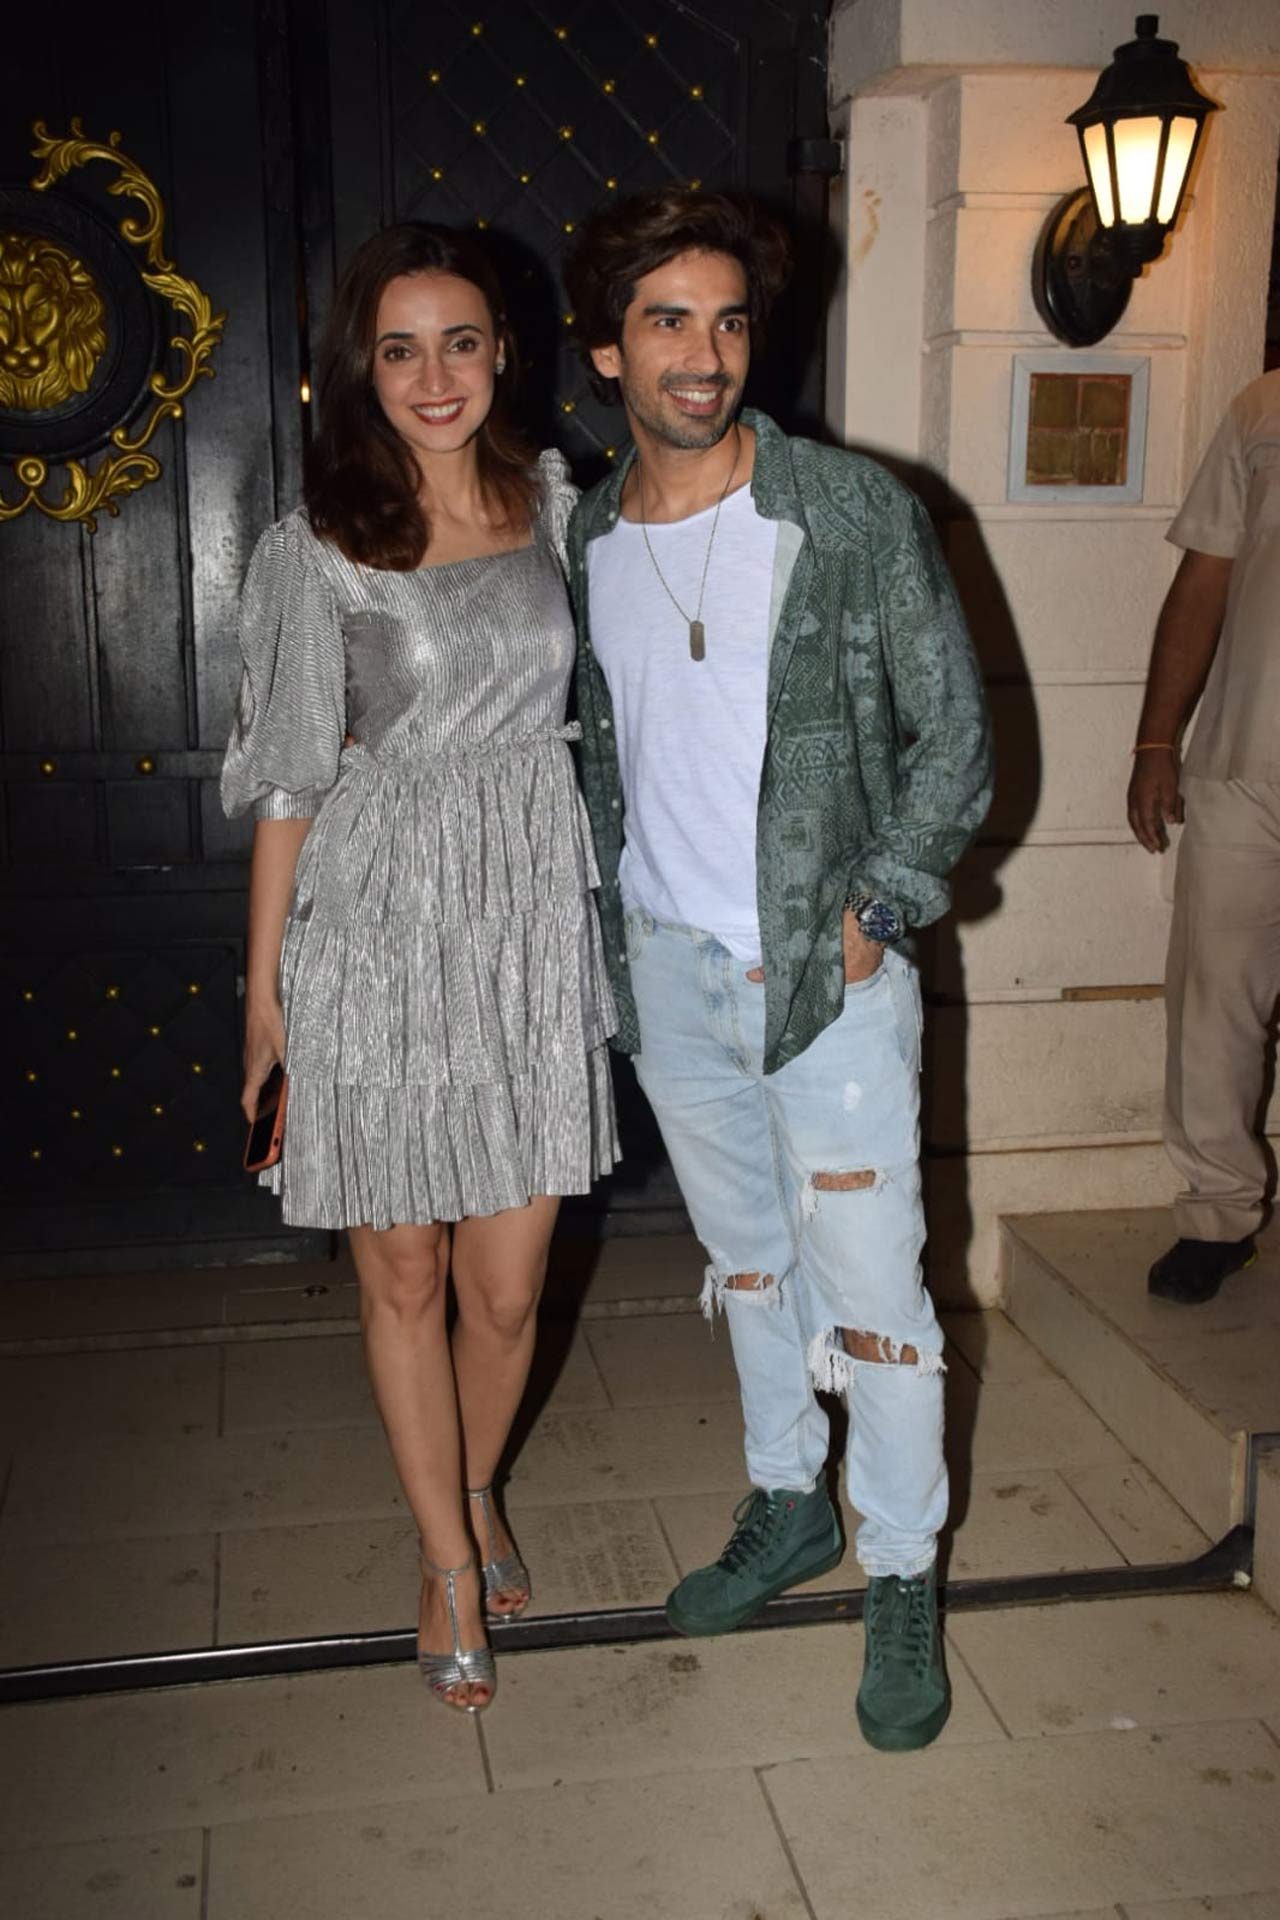 Sanaya Irani and her husband Mohit Sehgal were also a part of the celebration.